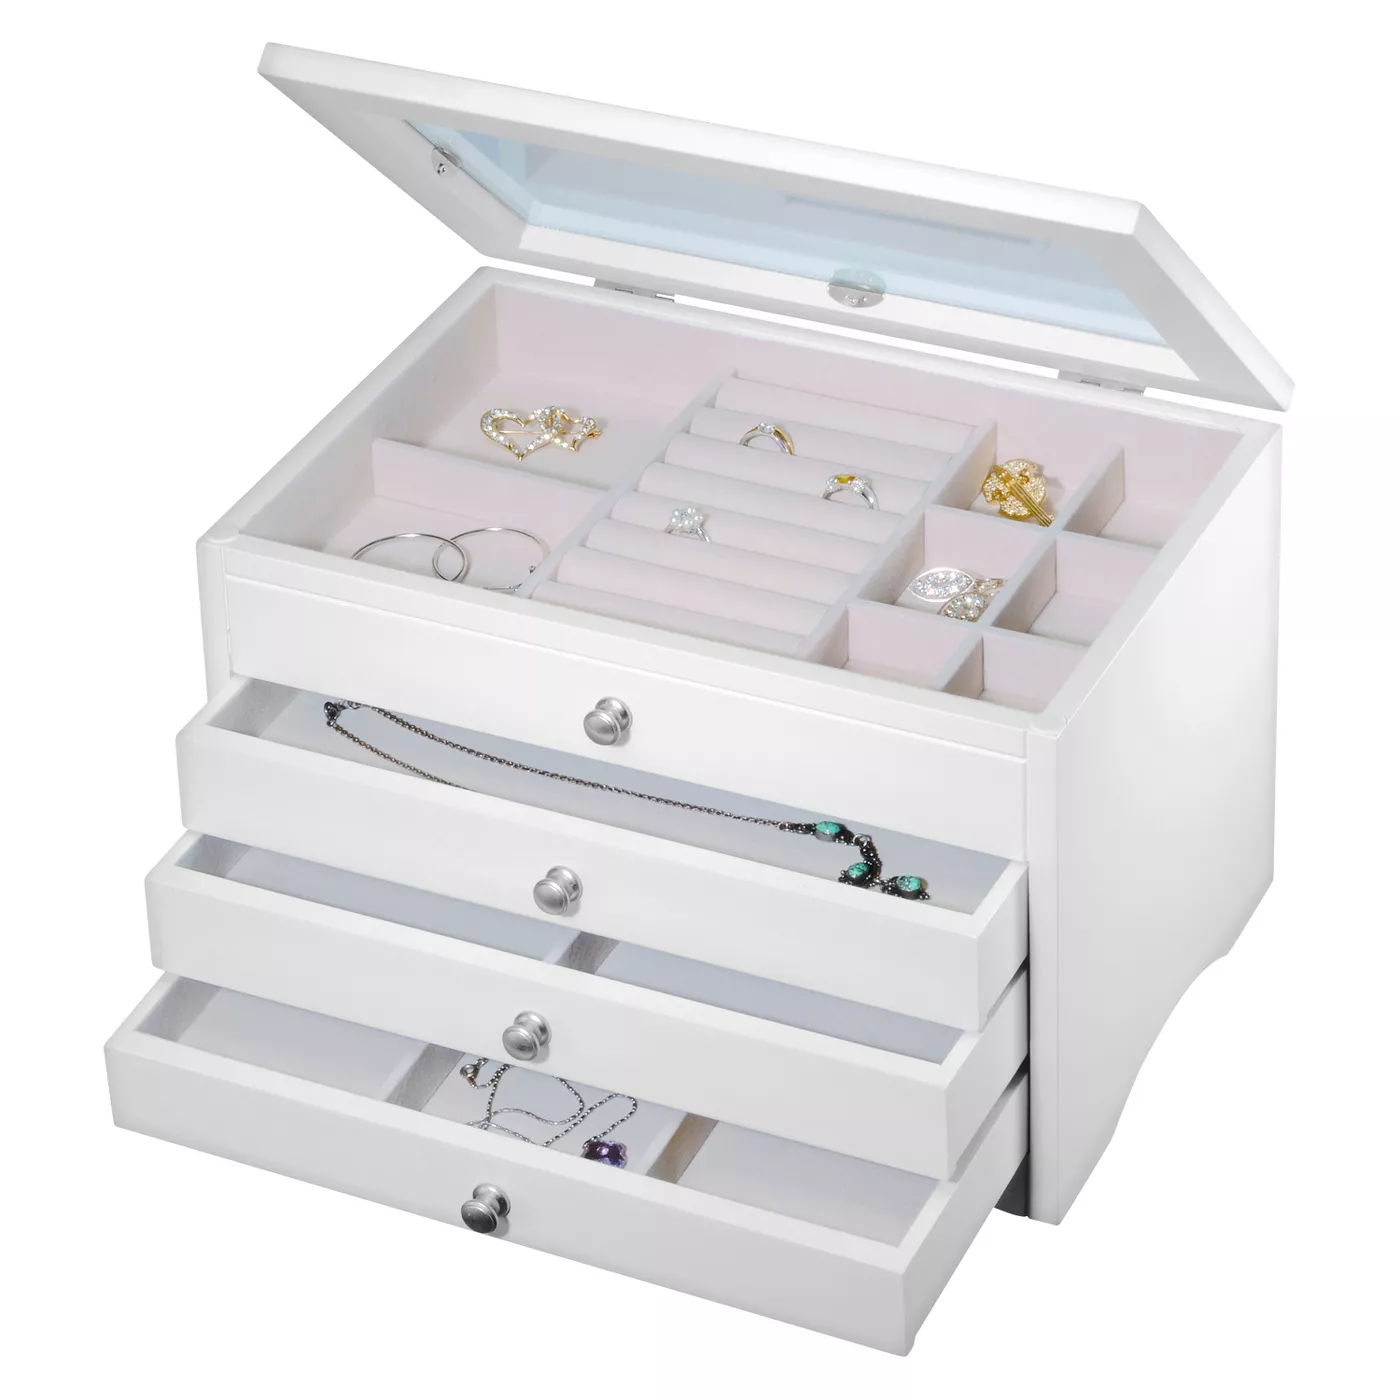 HomePointe Lift Top Wooden Jewelry Box.